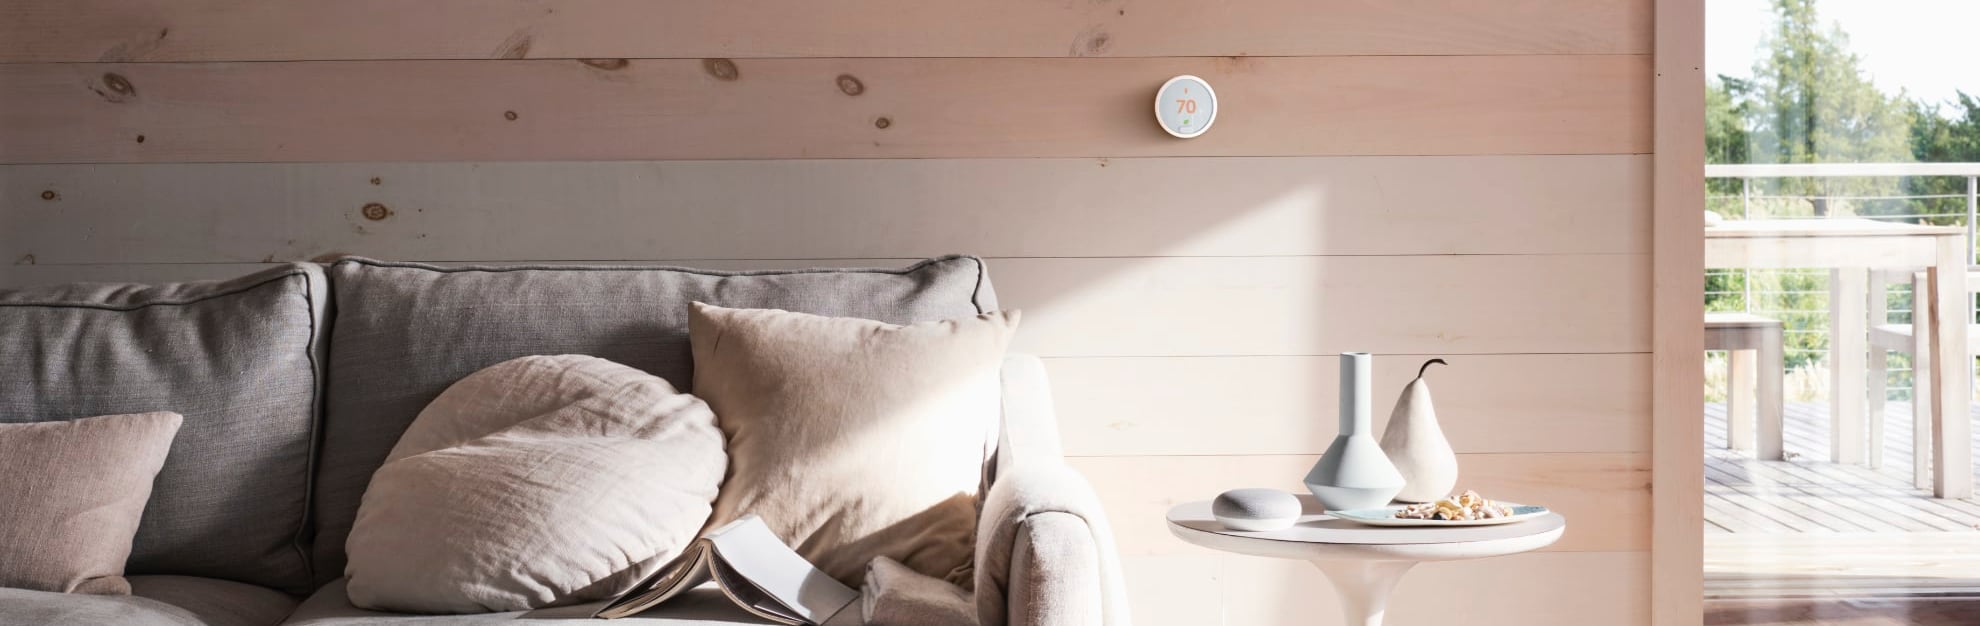 Vivint Home Automation in Lakeland